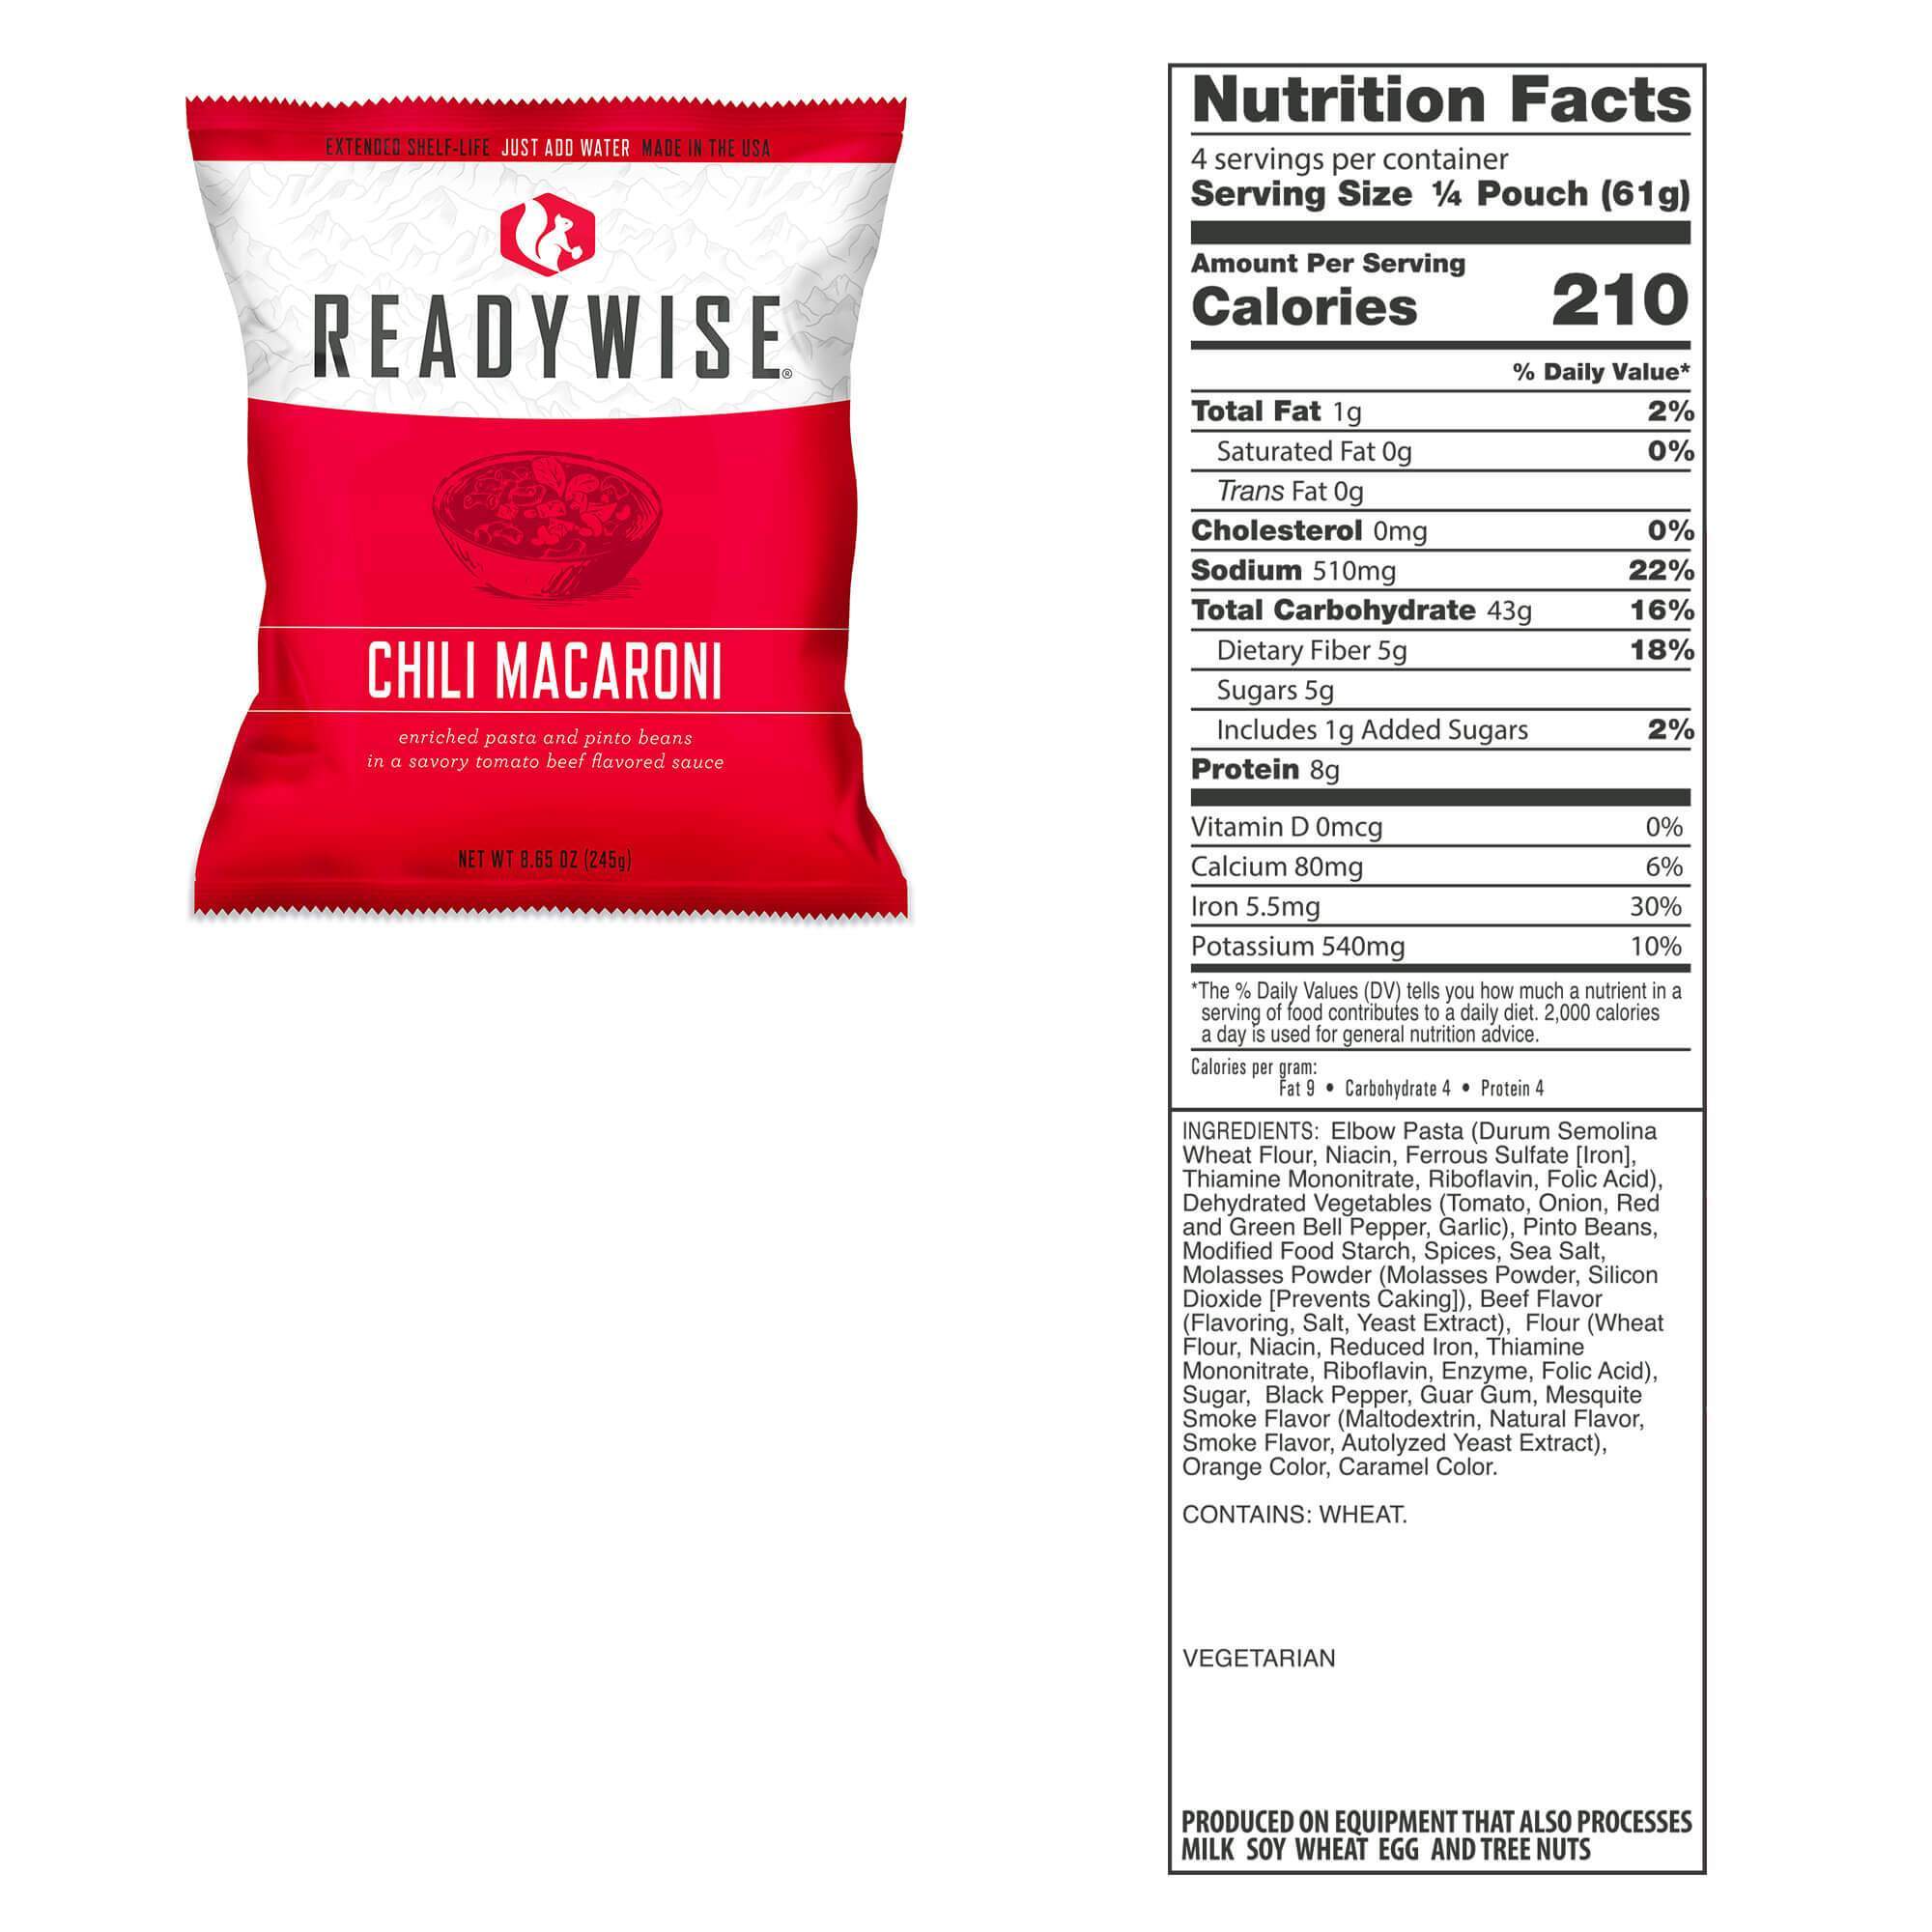 ReadyWise (formerly Wise Food Storage) 120 Serving Emergency Food Supply chips.